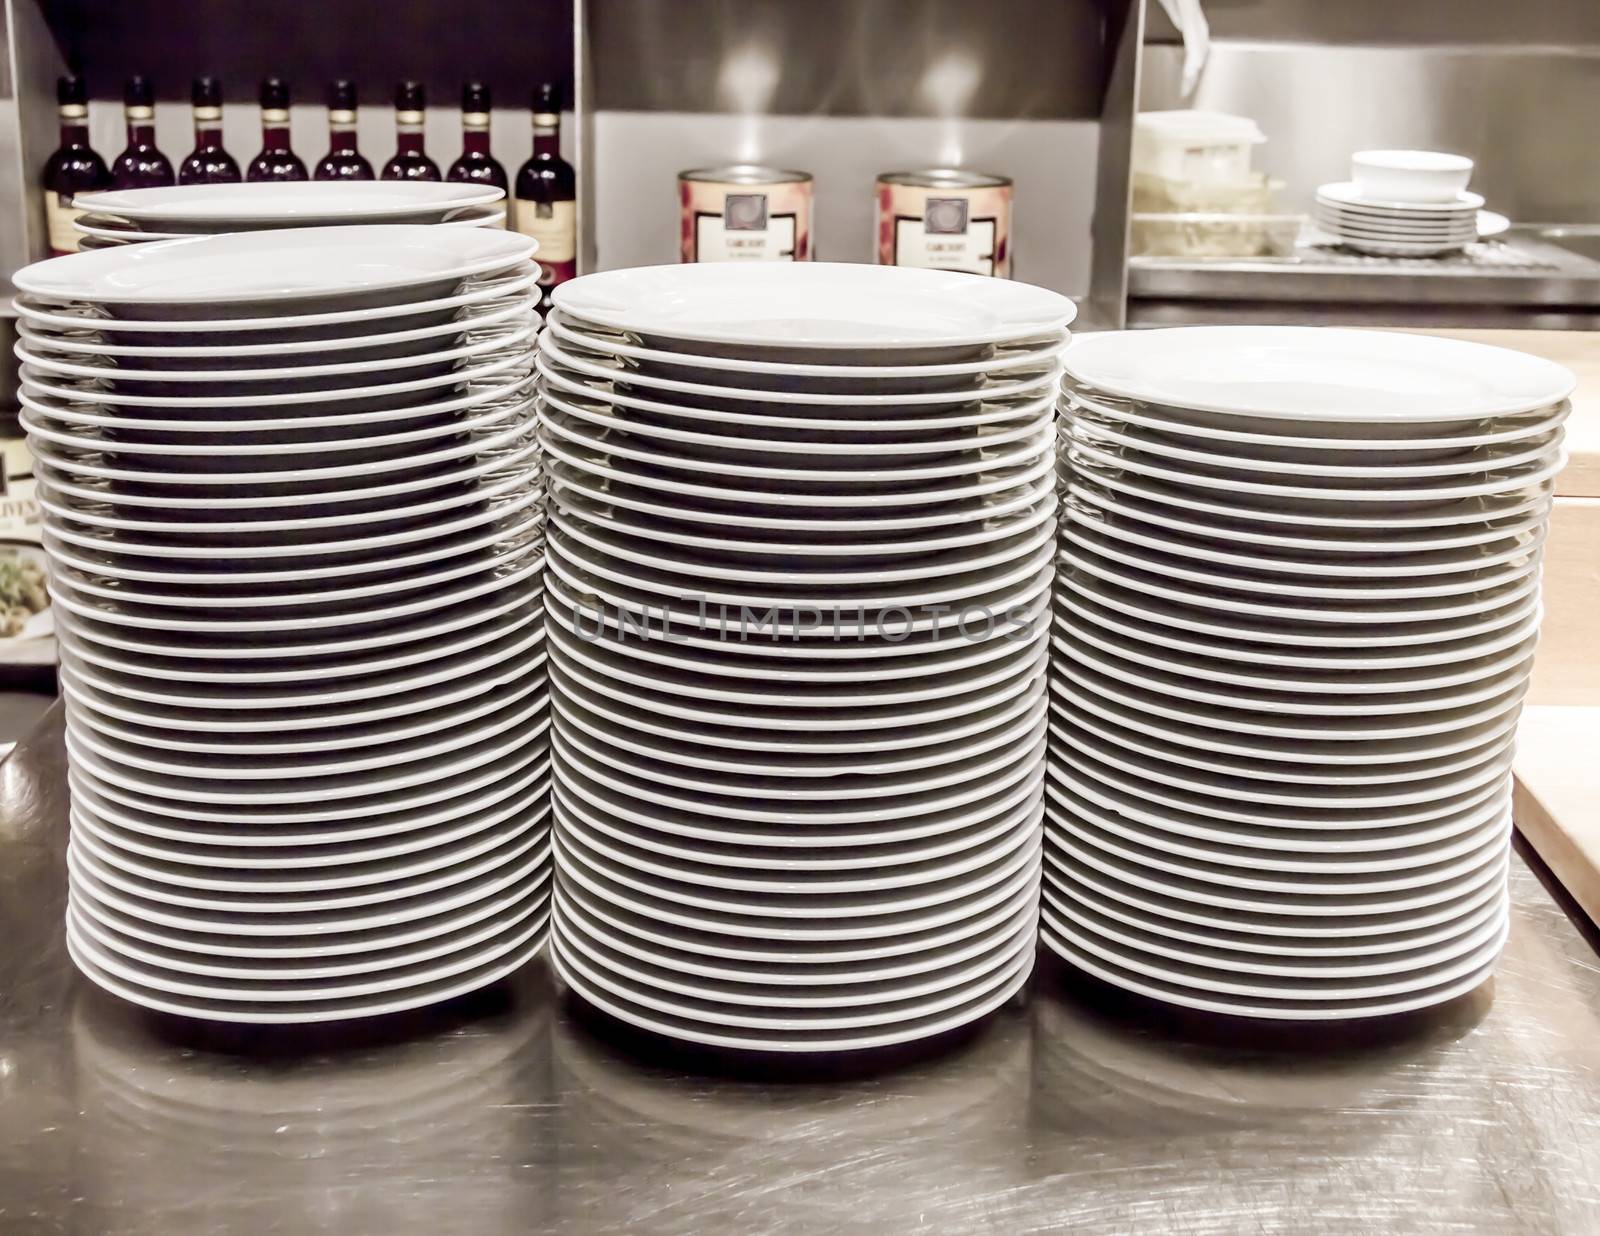 Stacks of white plates against a restaurant background by Tetyana